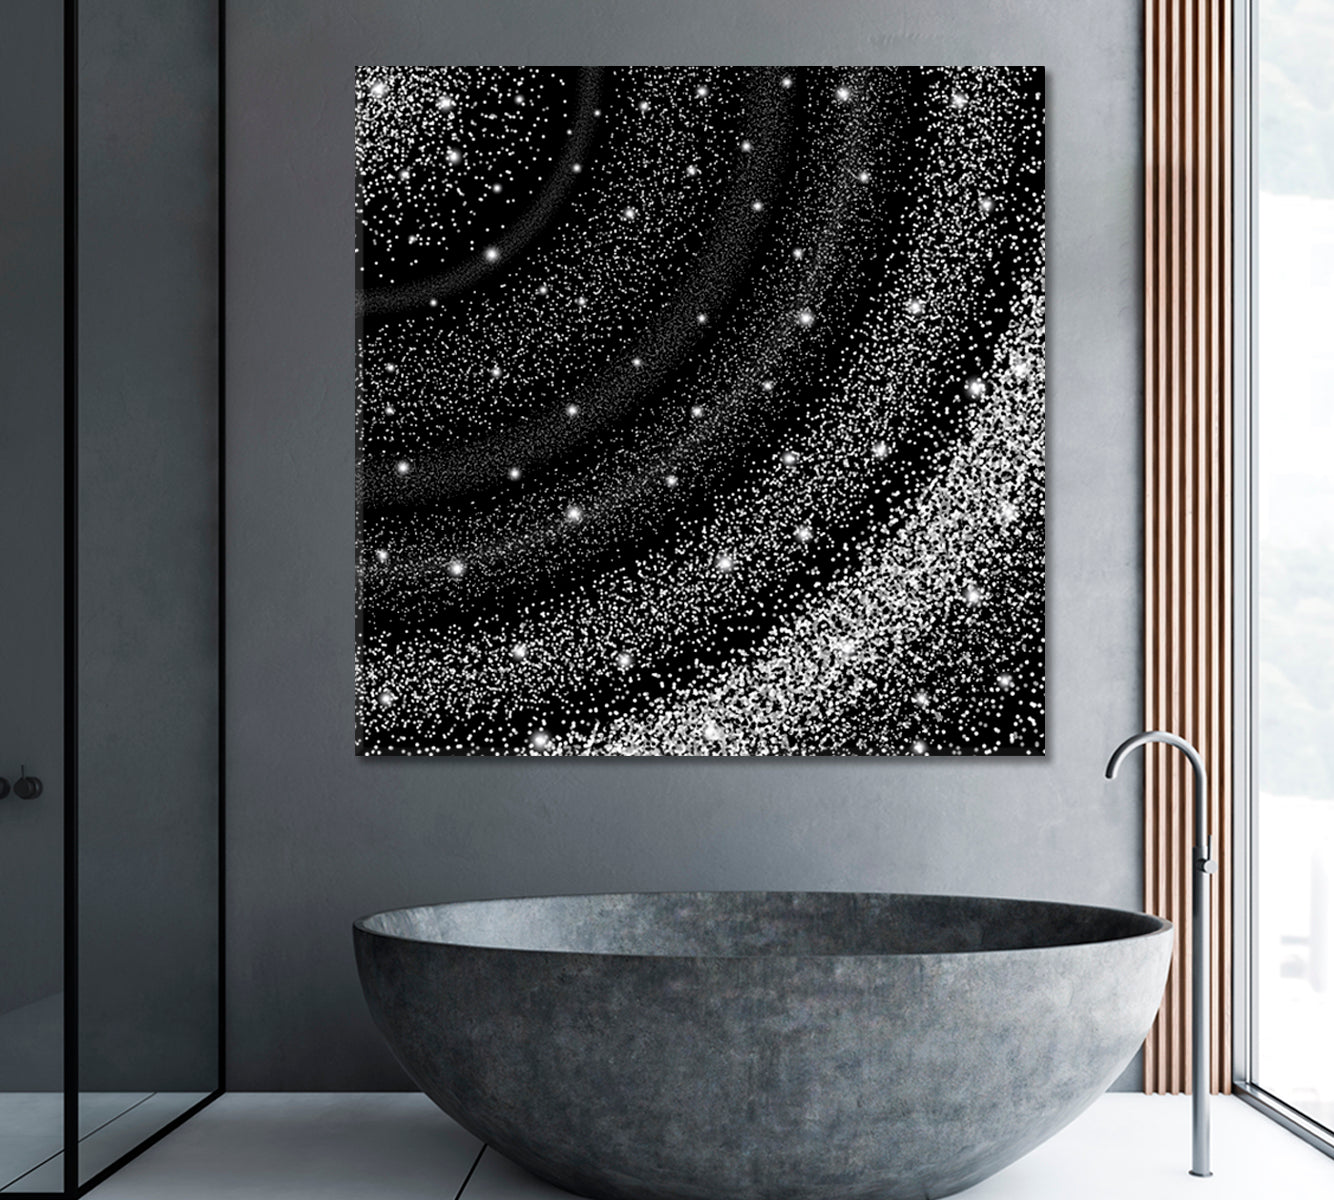 Abstract Shining Space Canvas Print ArtLexy   